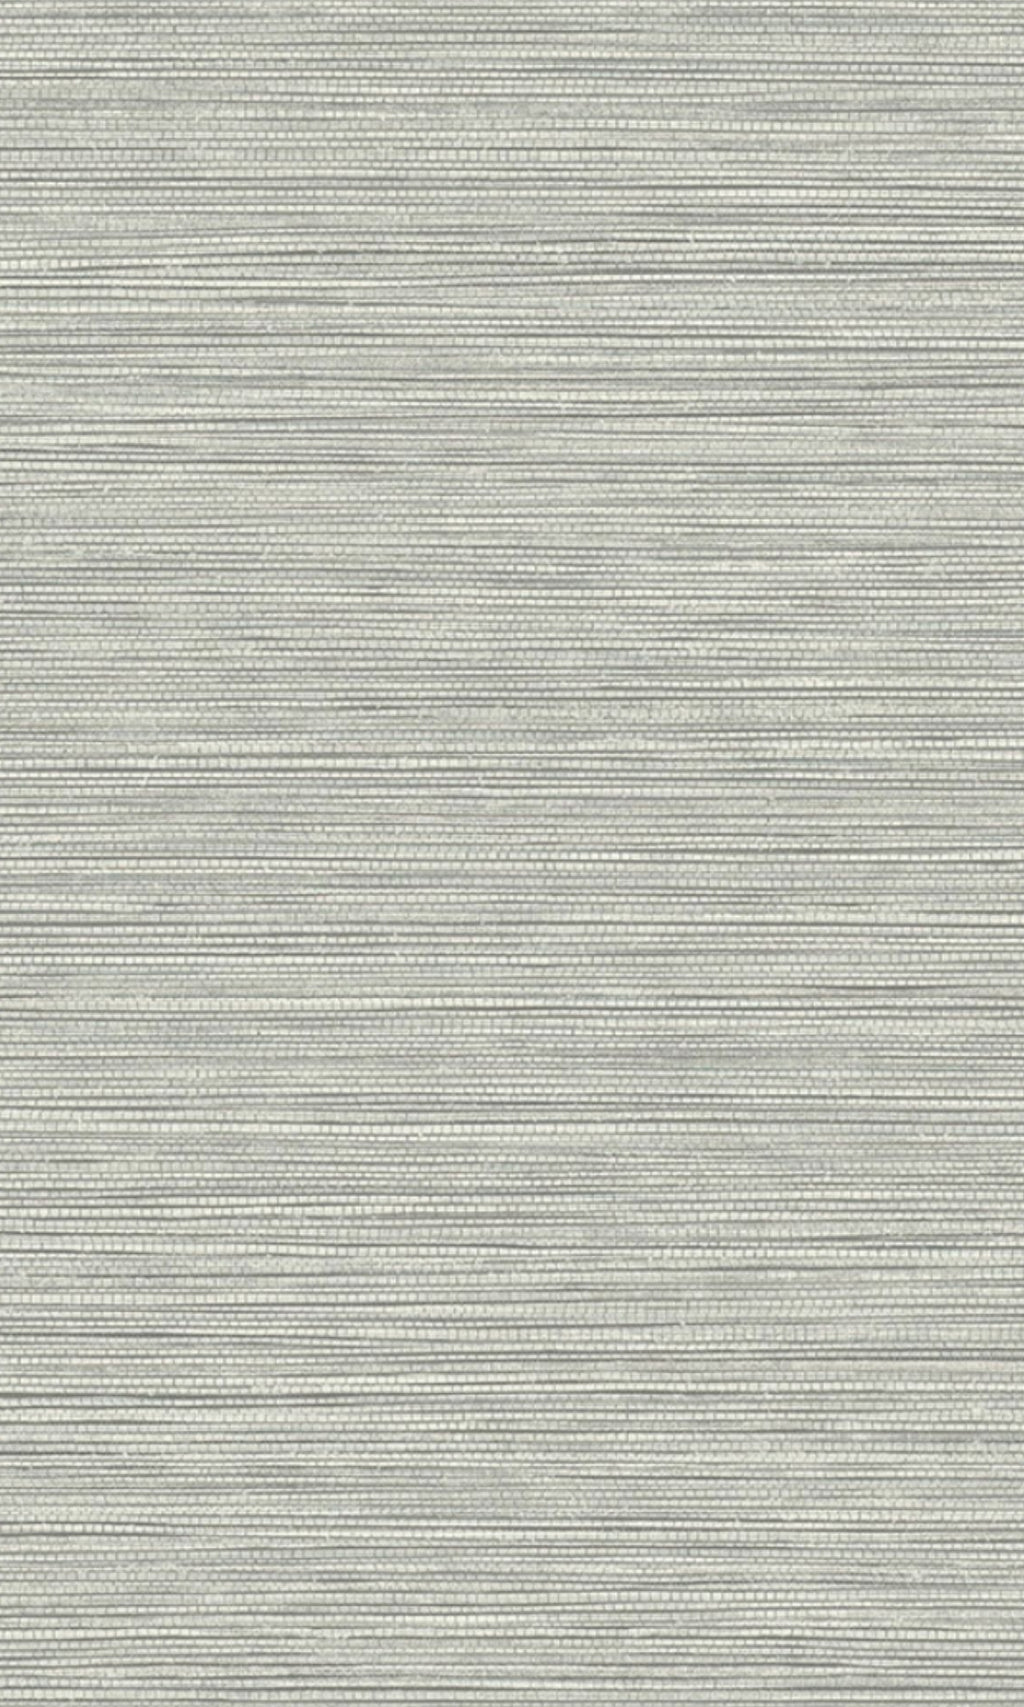 Cove Grey Horizontal Line Vinyl Textured Commercial CPW1004